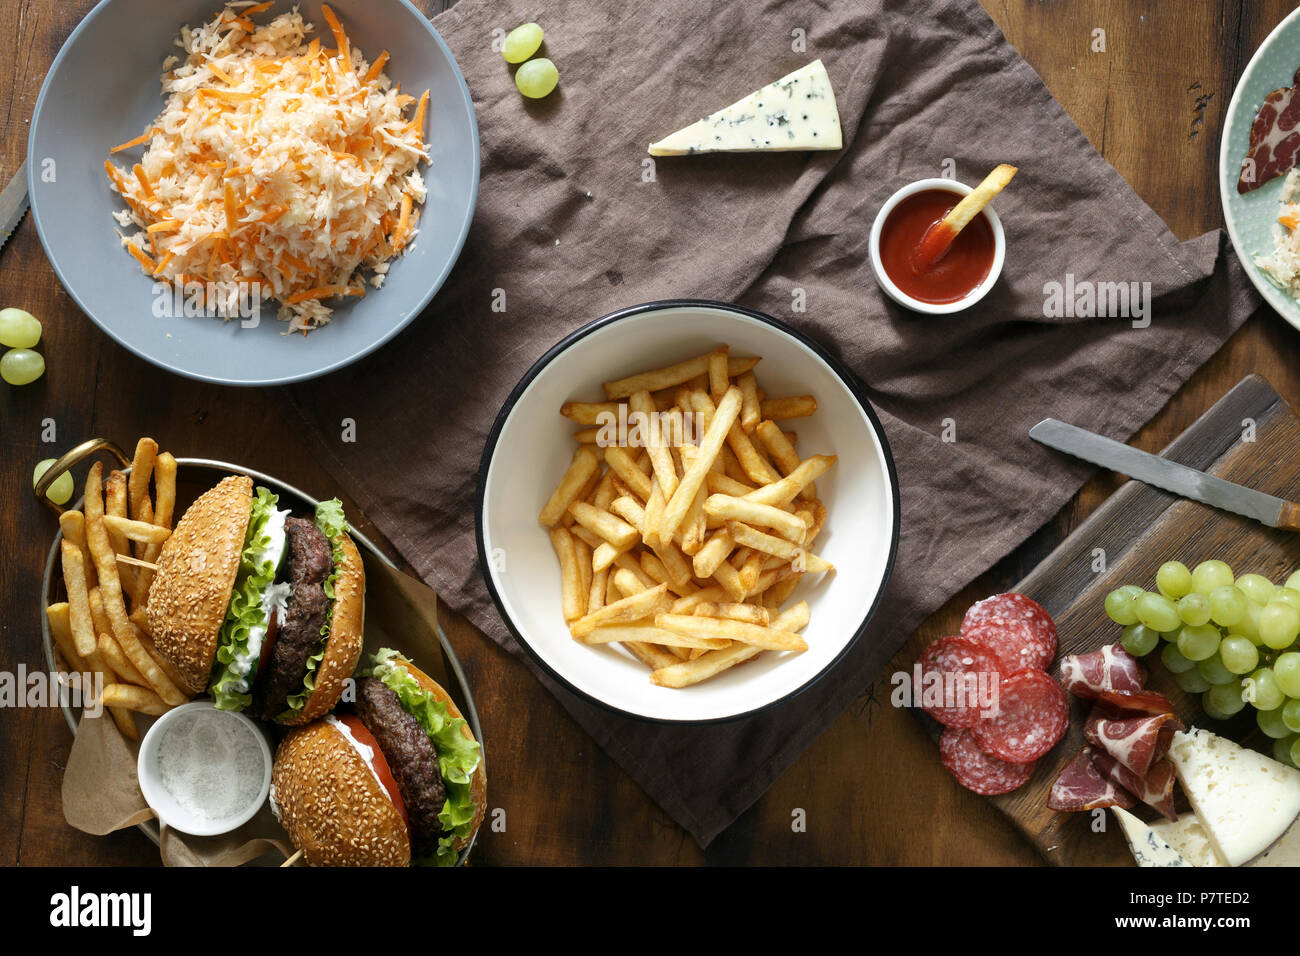 Top view dinner outdoor table with burger, french fries, salad and snacks  on wooden table Stock Photo - Alamy